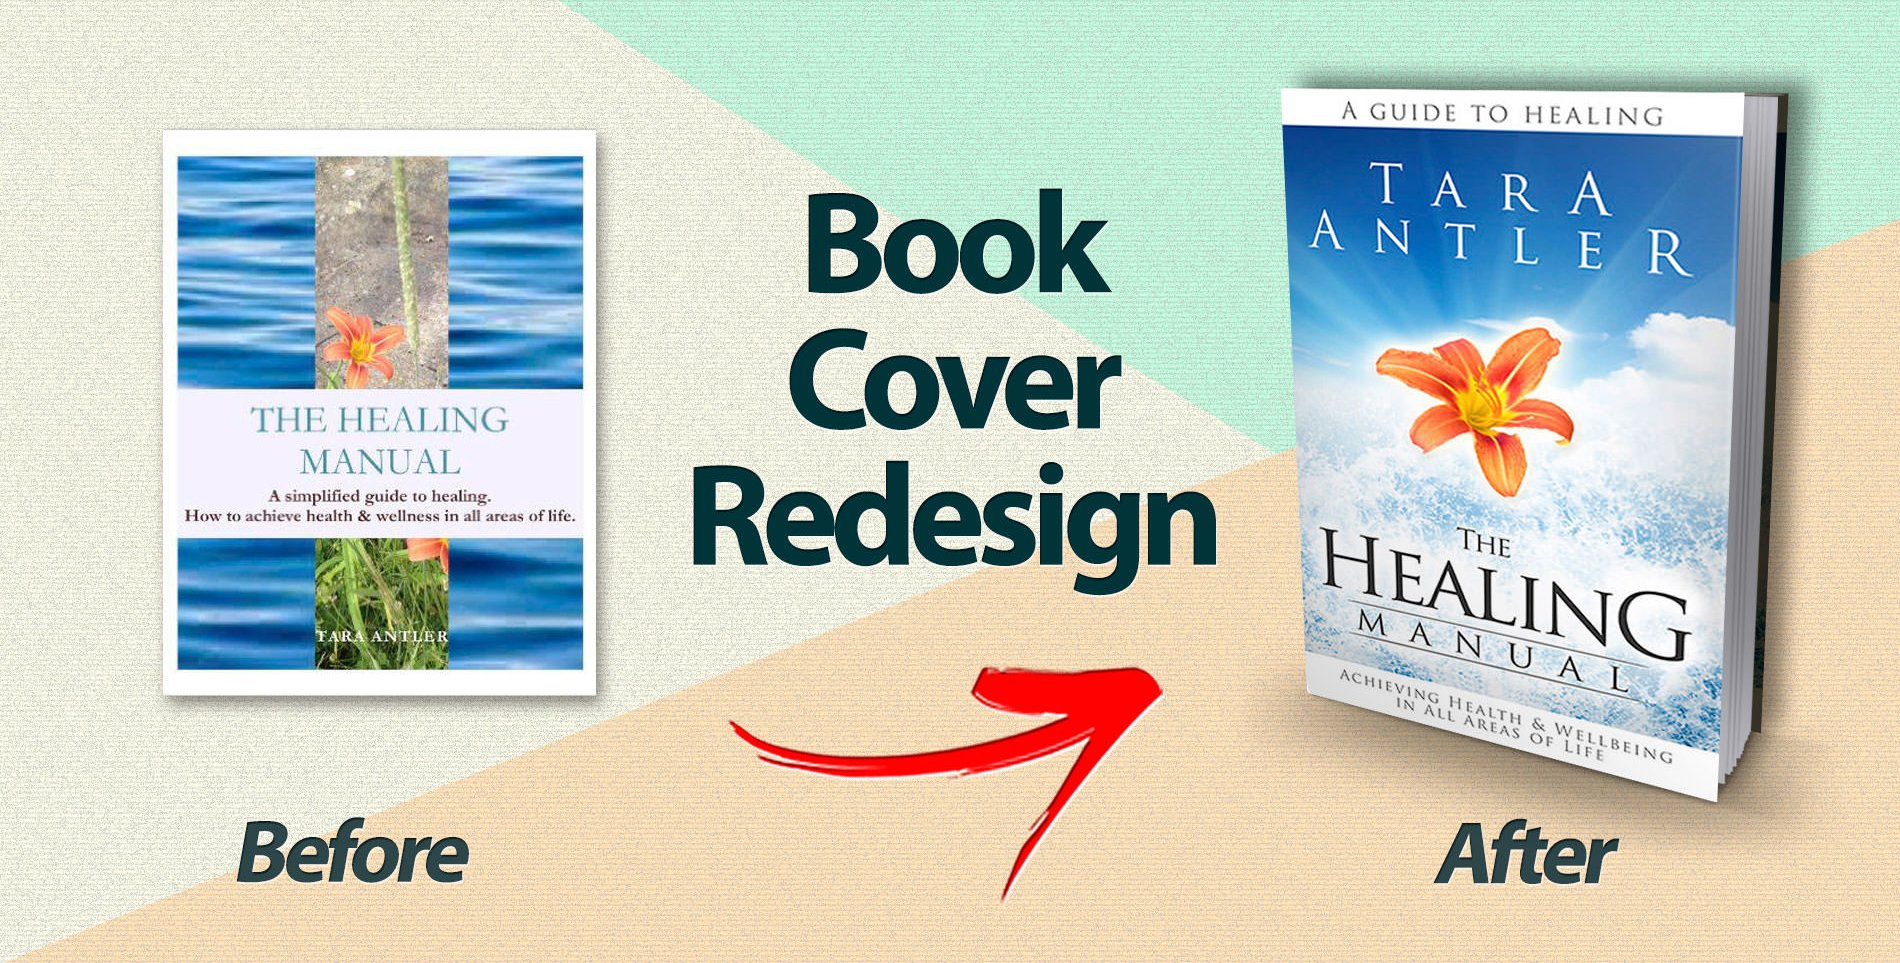 The cover of Healing Manual before and after redesign